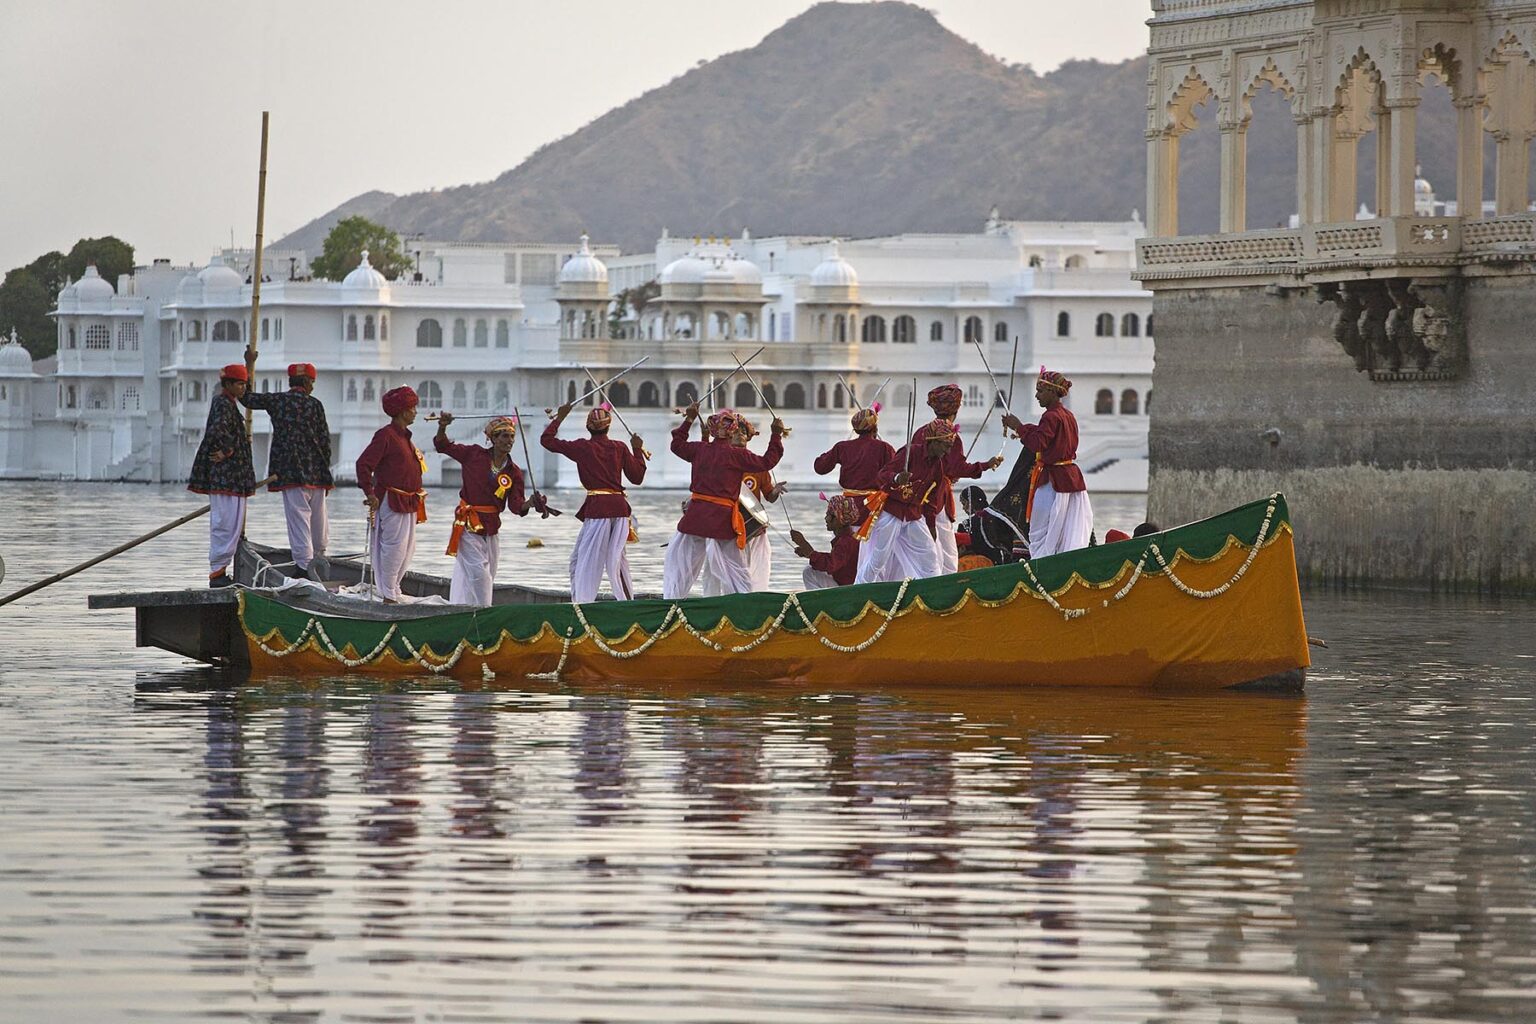 Rajasthani men dance with swords on a boat on LAKE PICHOLA during the GANGUR FESTIVAL or MEWAR FESTIVAL - UDAIPUR, RAJASTHAN, INDIA